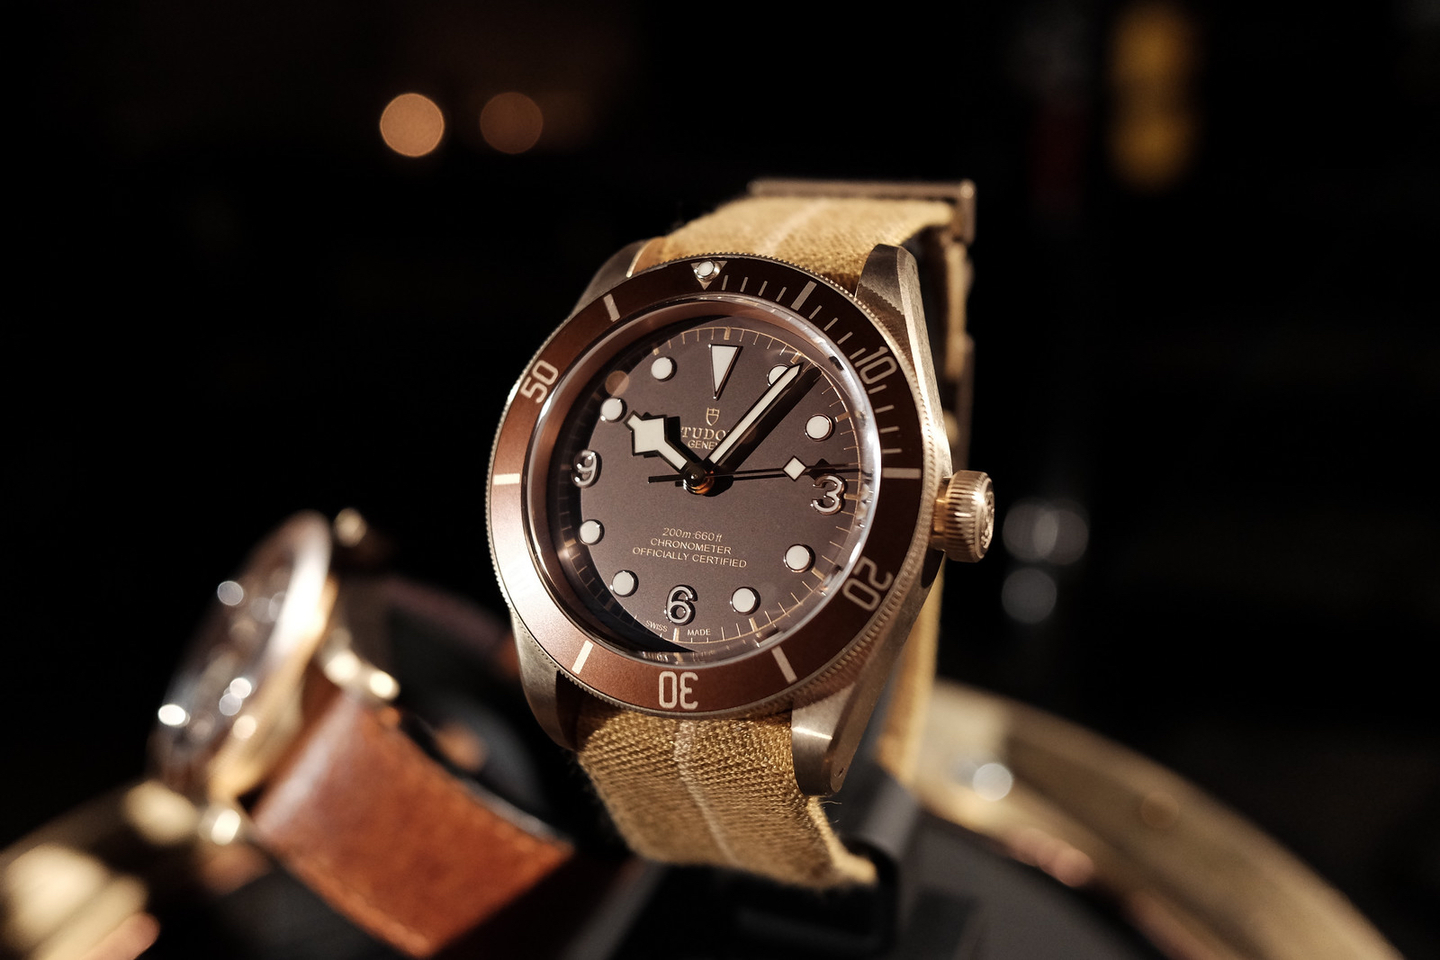 Introducing the Black Bay Bronze with in-house movement